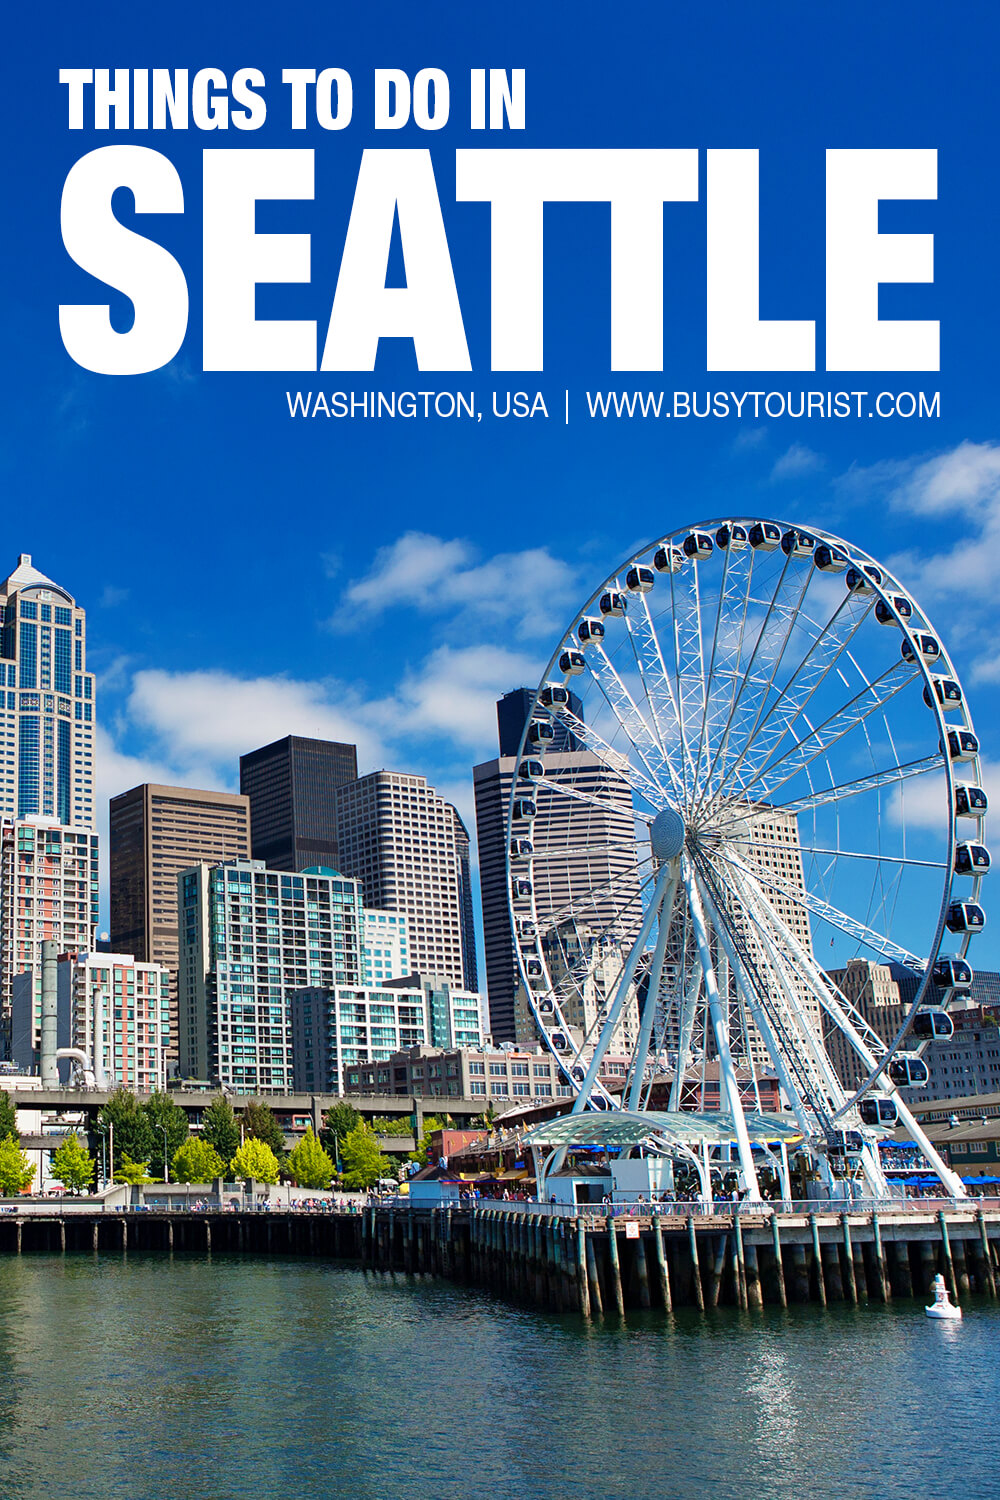 best things to do in seattle